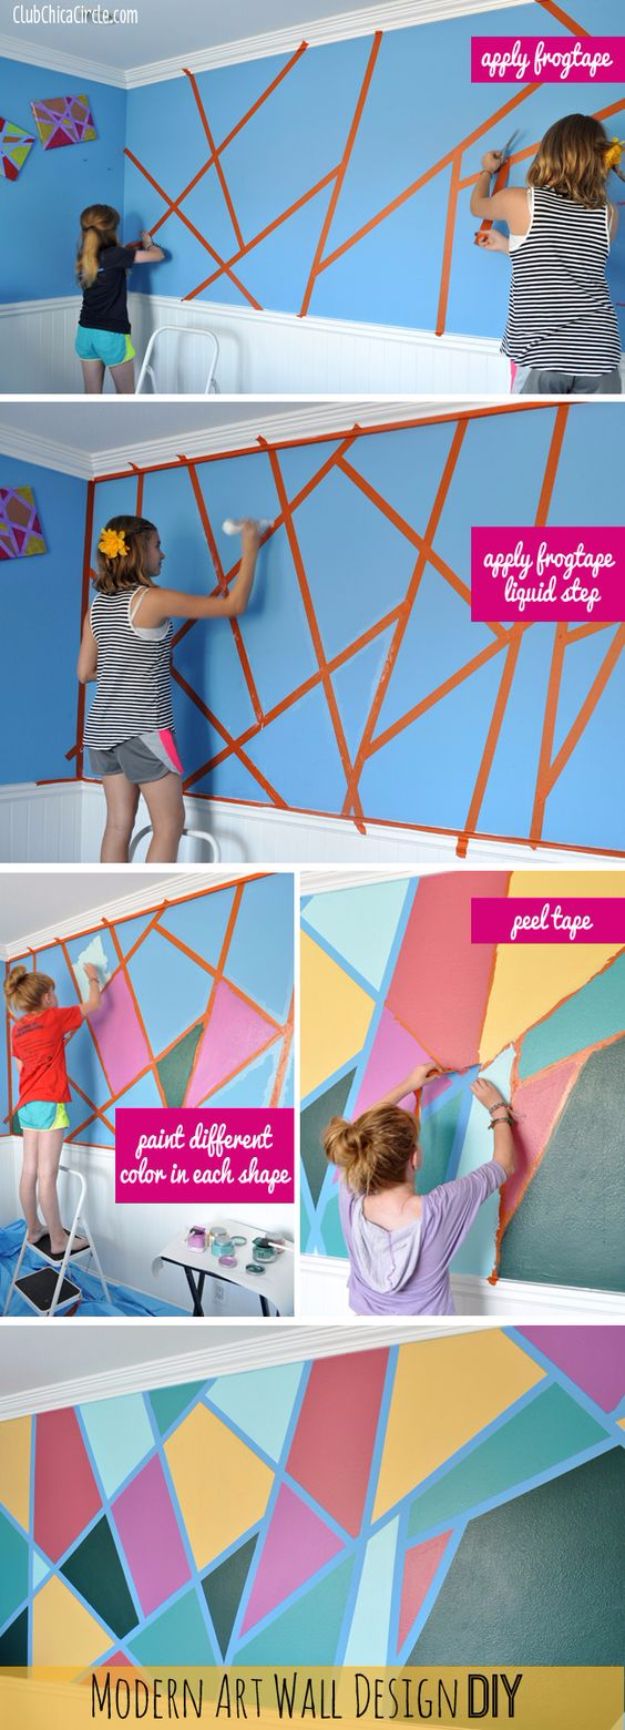 34 Cool Ways to Paint Walls